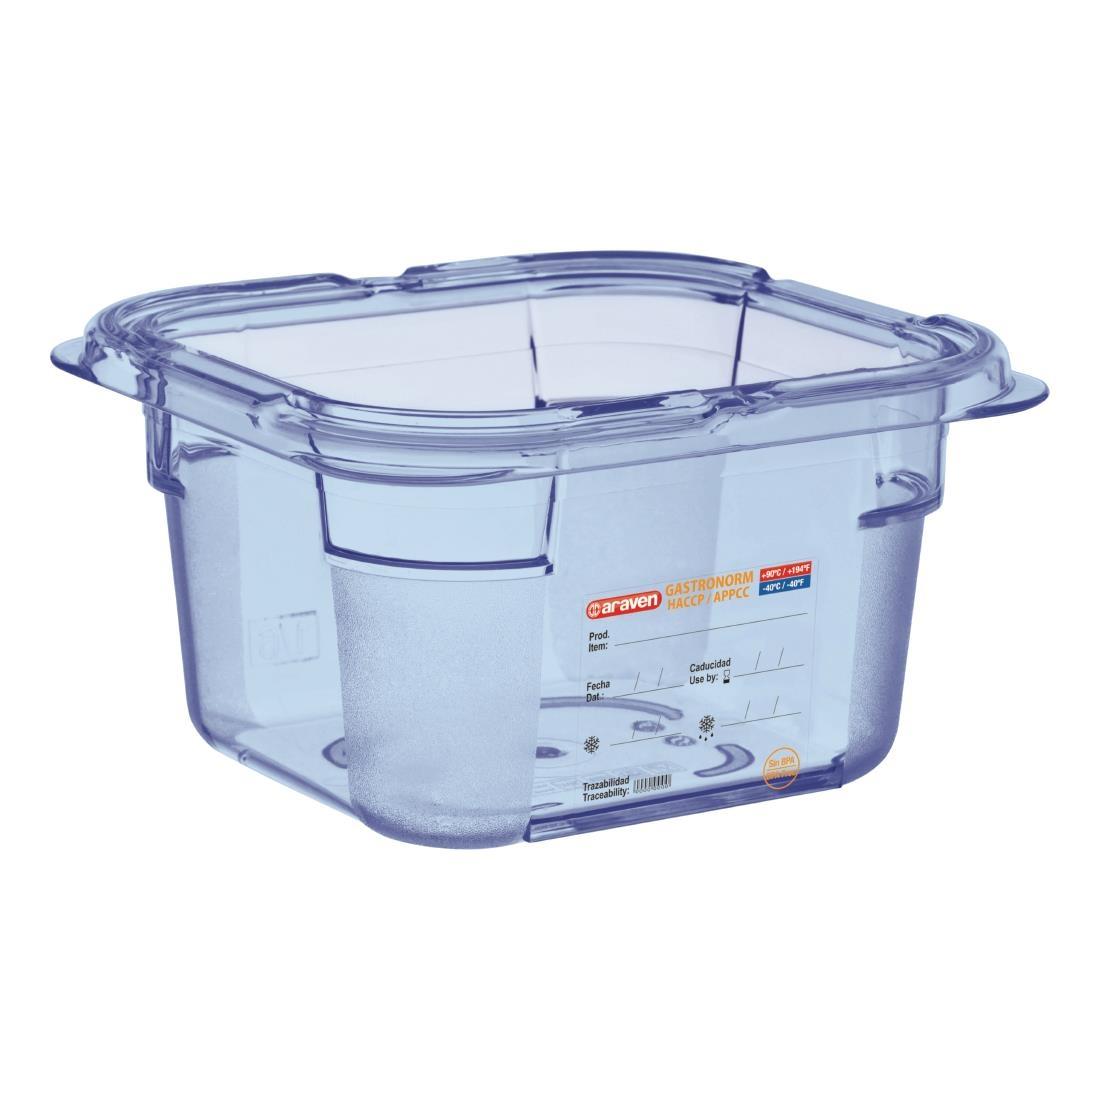 Araven ABS Food Storage Container Blue GN 1/6 100mm - GP571  - 1